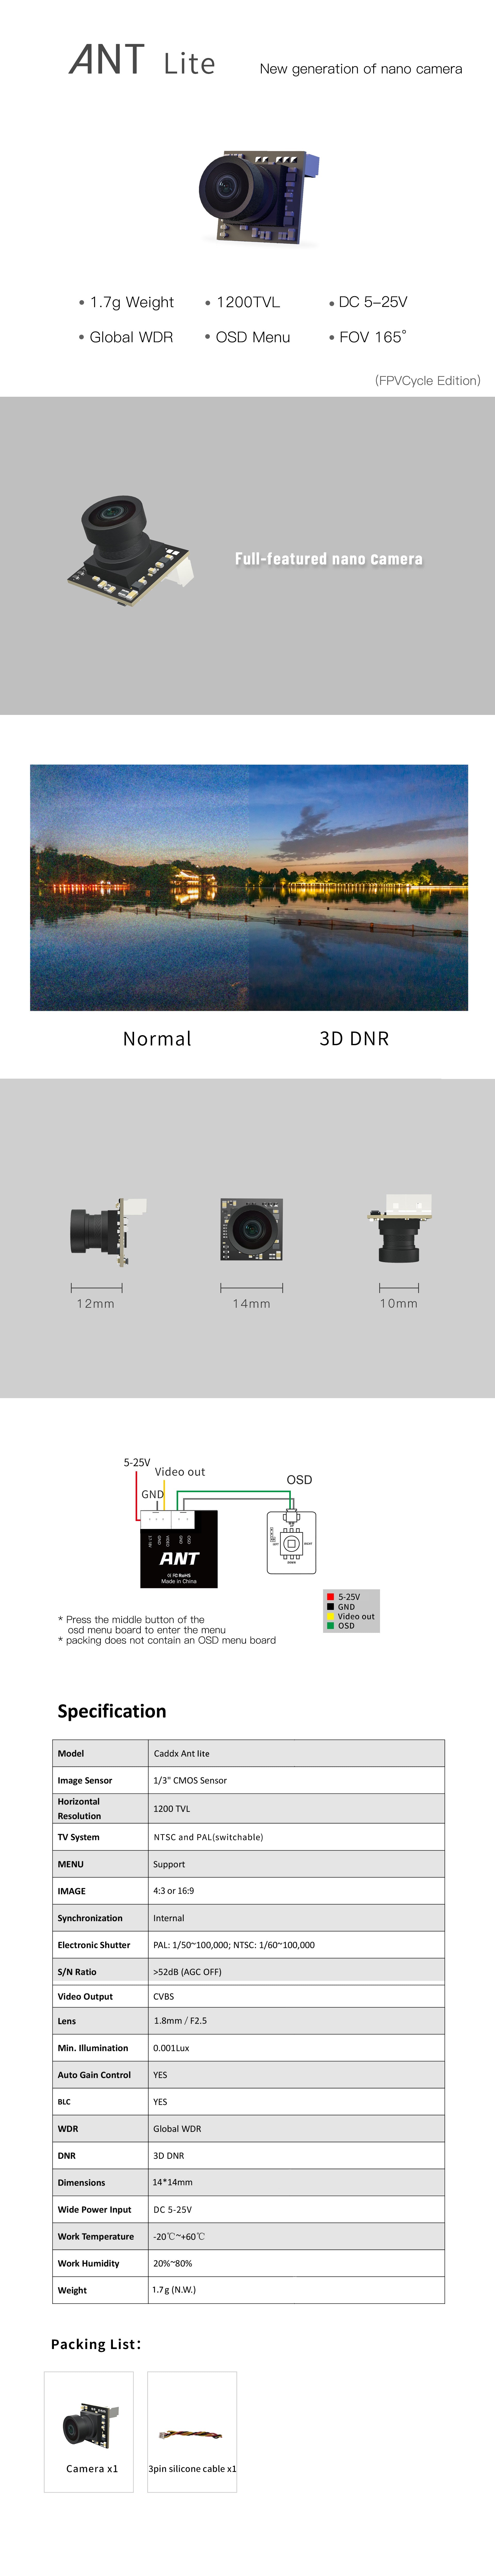 ANT Lite is a new generation of nano camera 1.7g Weight 2OOTV